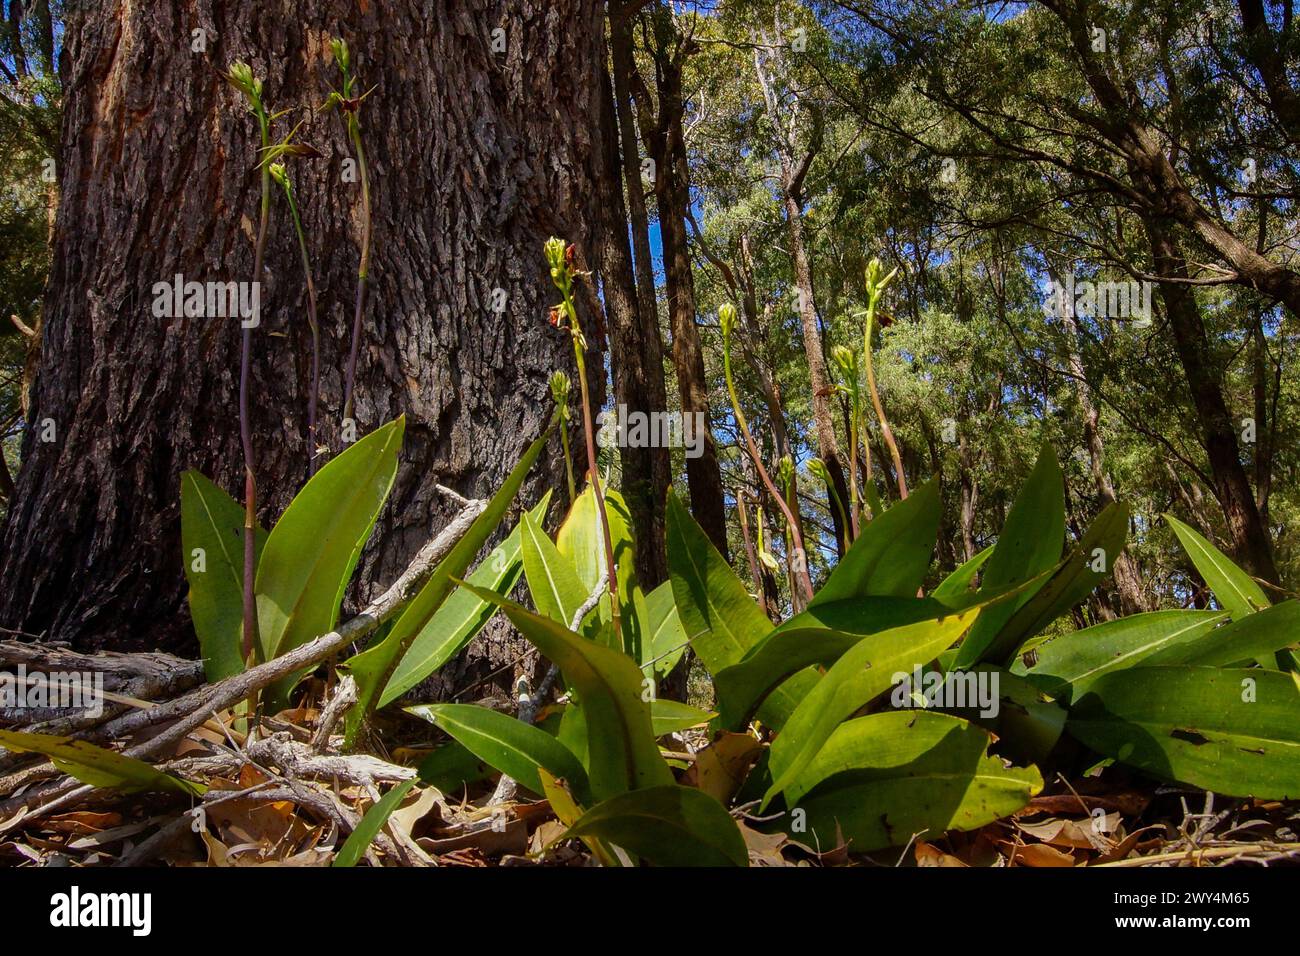 Flowering plants of the terrestrial Western Australian slipper orchid or western tongue orchid (Cryptostylis ovata), in natural habitat, Australia Stock Photo